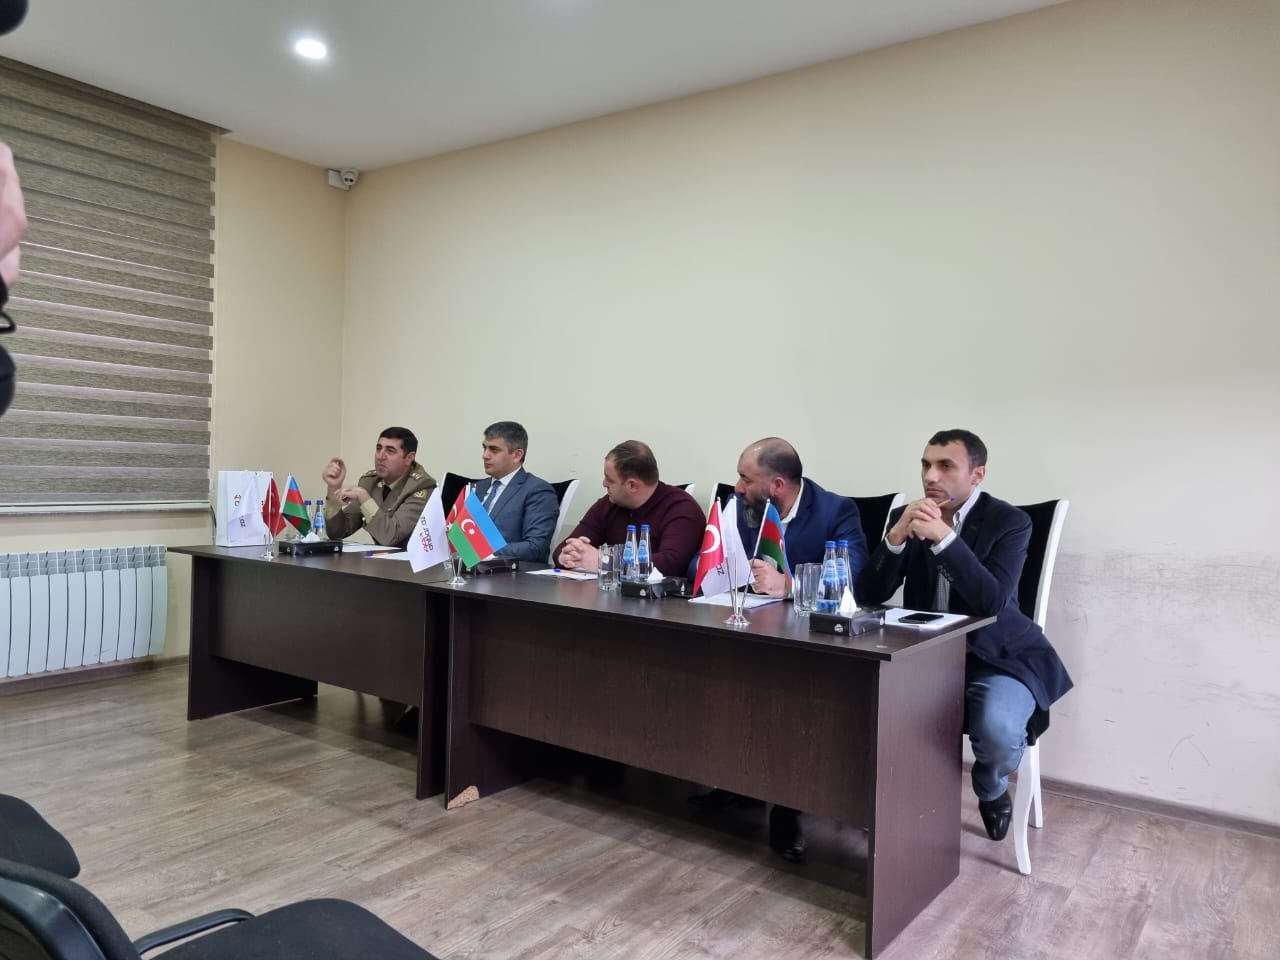 ANBAR.AZ LLC held a regular meeting on "Fire Safety, Technical Safety and Occupational Safety".